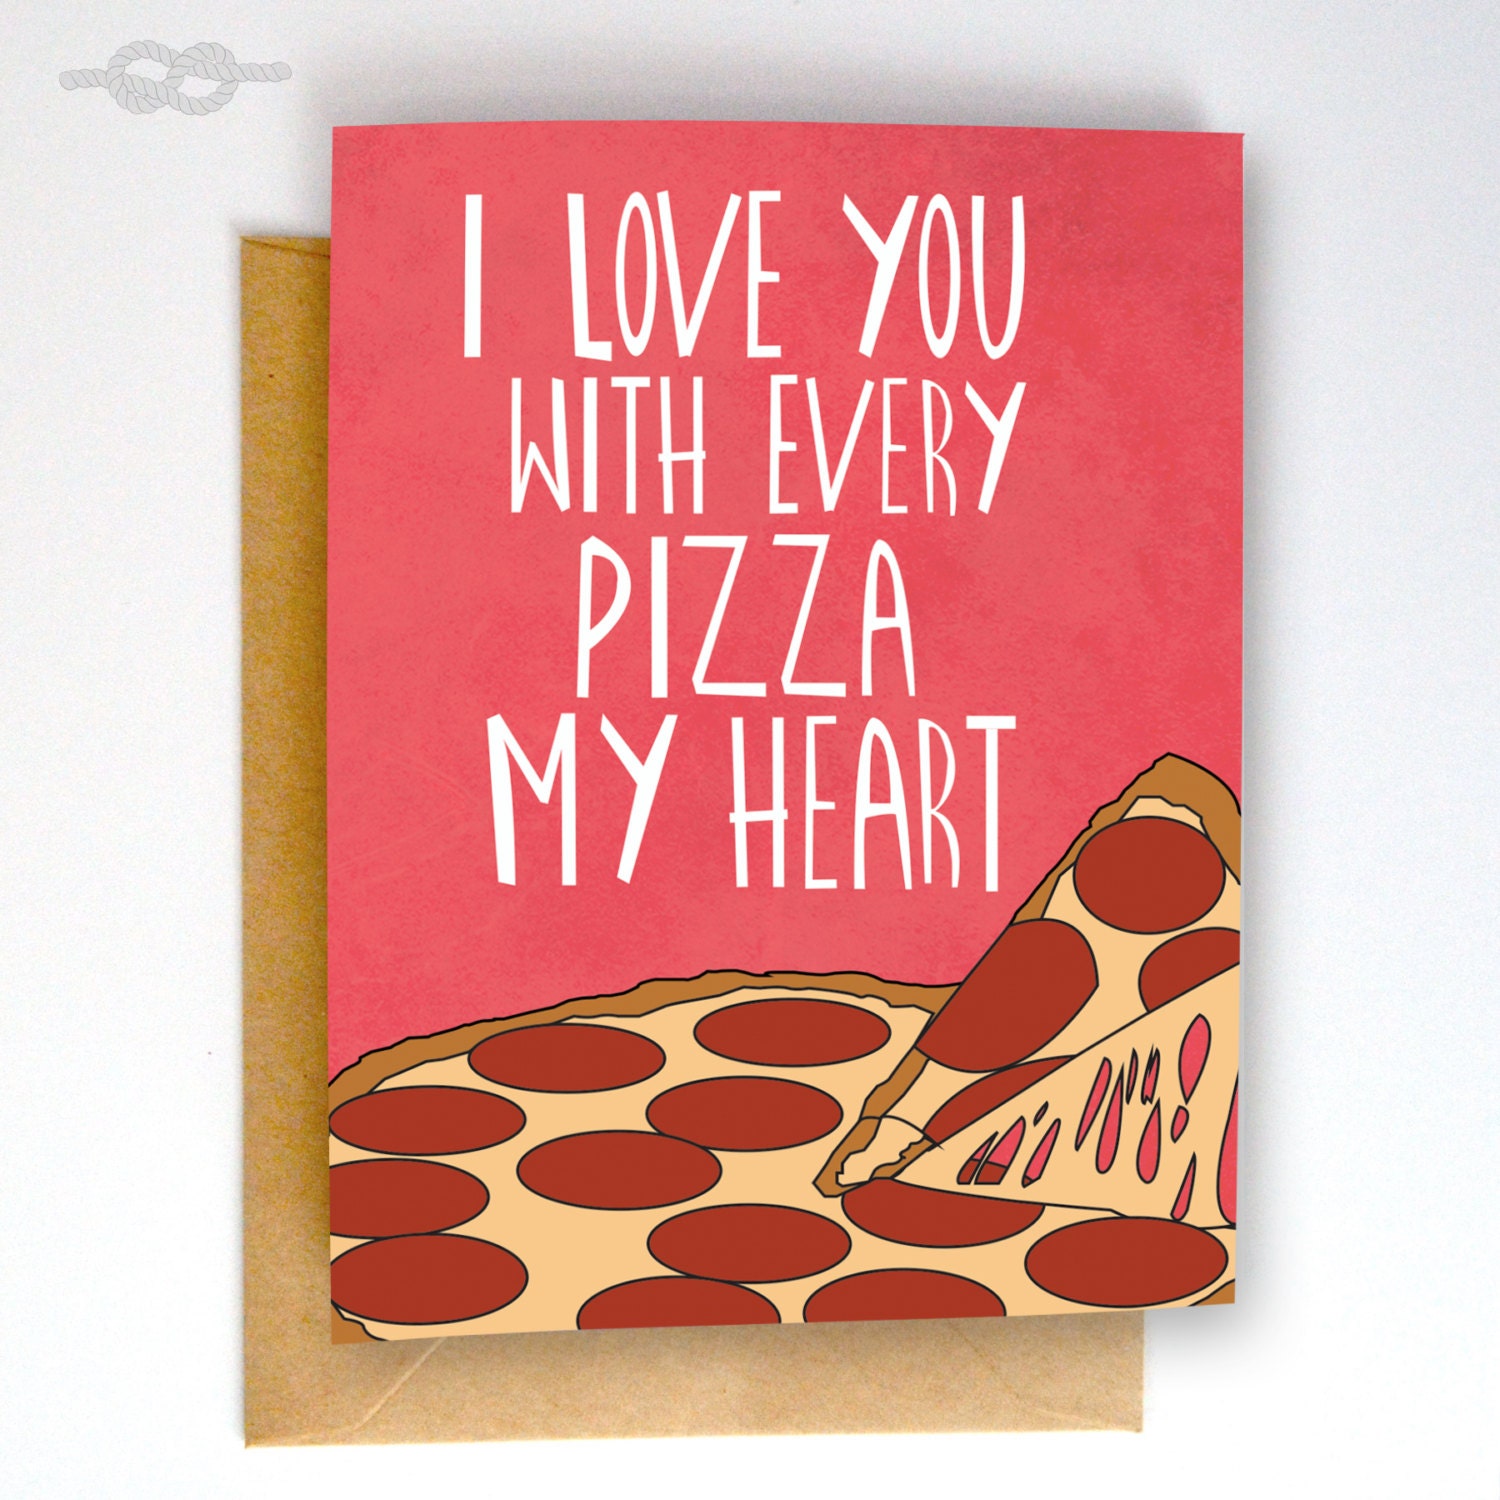 Funny Valentines Card Funny Greeting Card Funny Love Card
